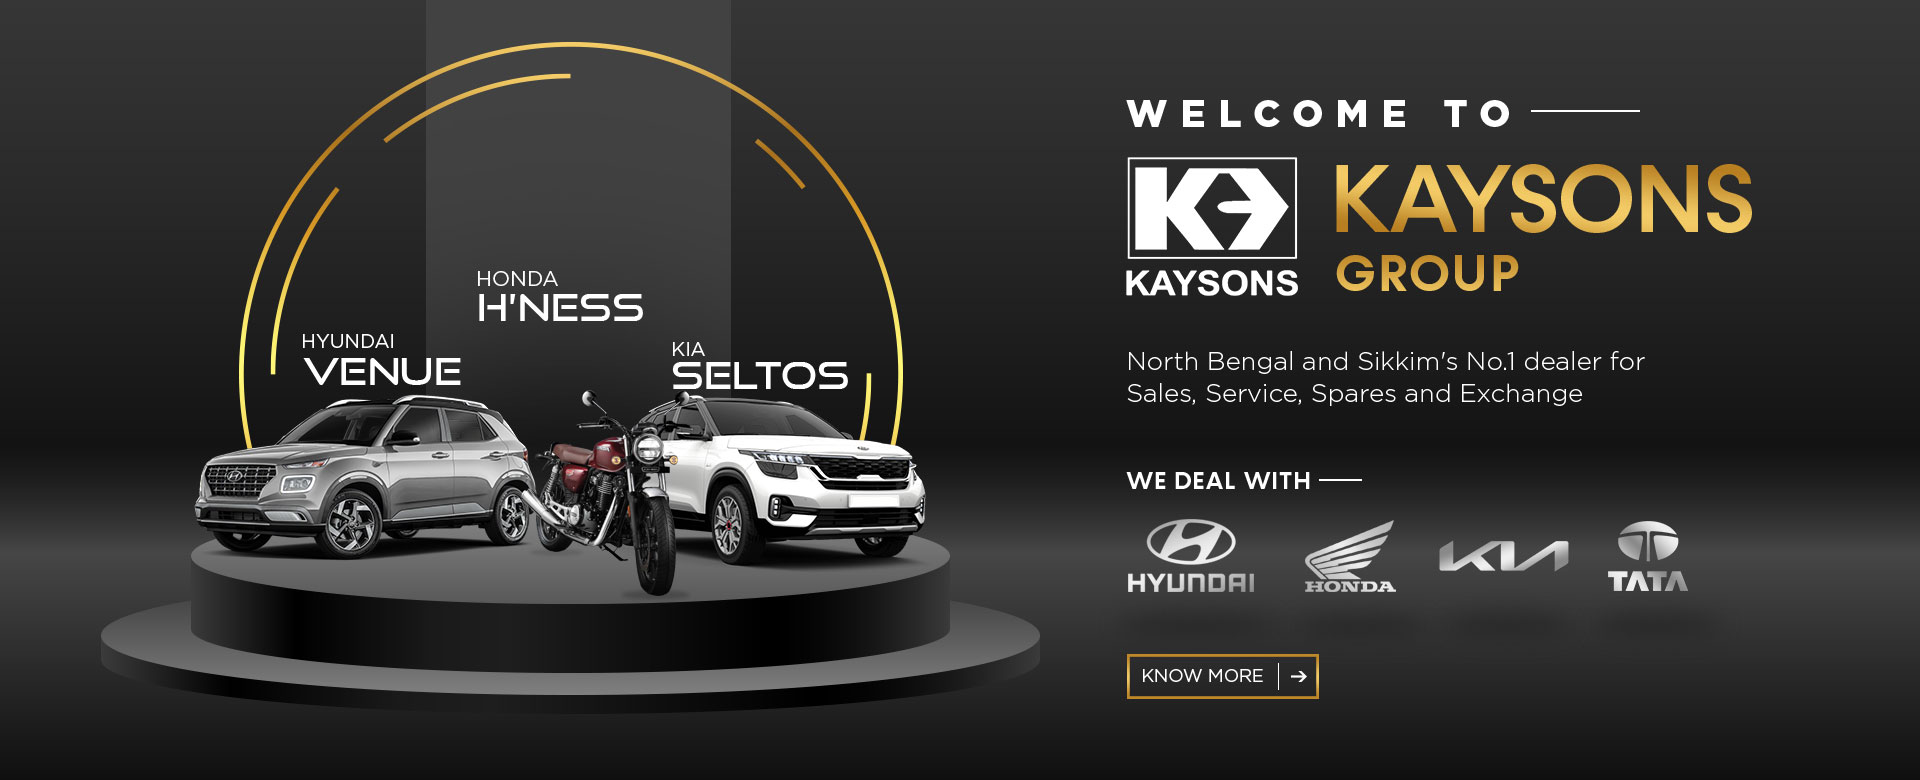 Kaysons Group